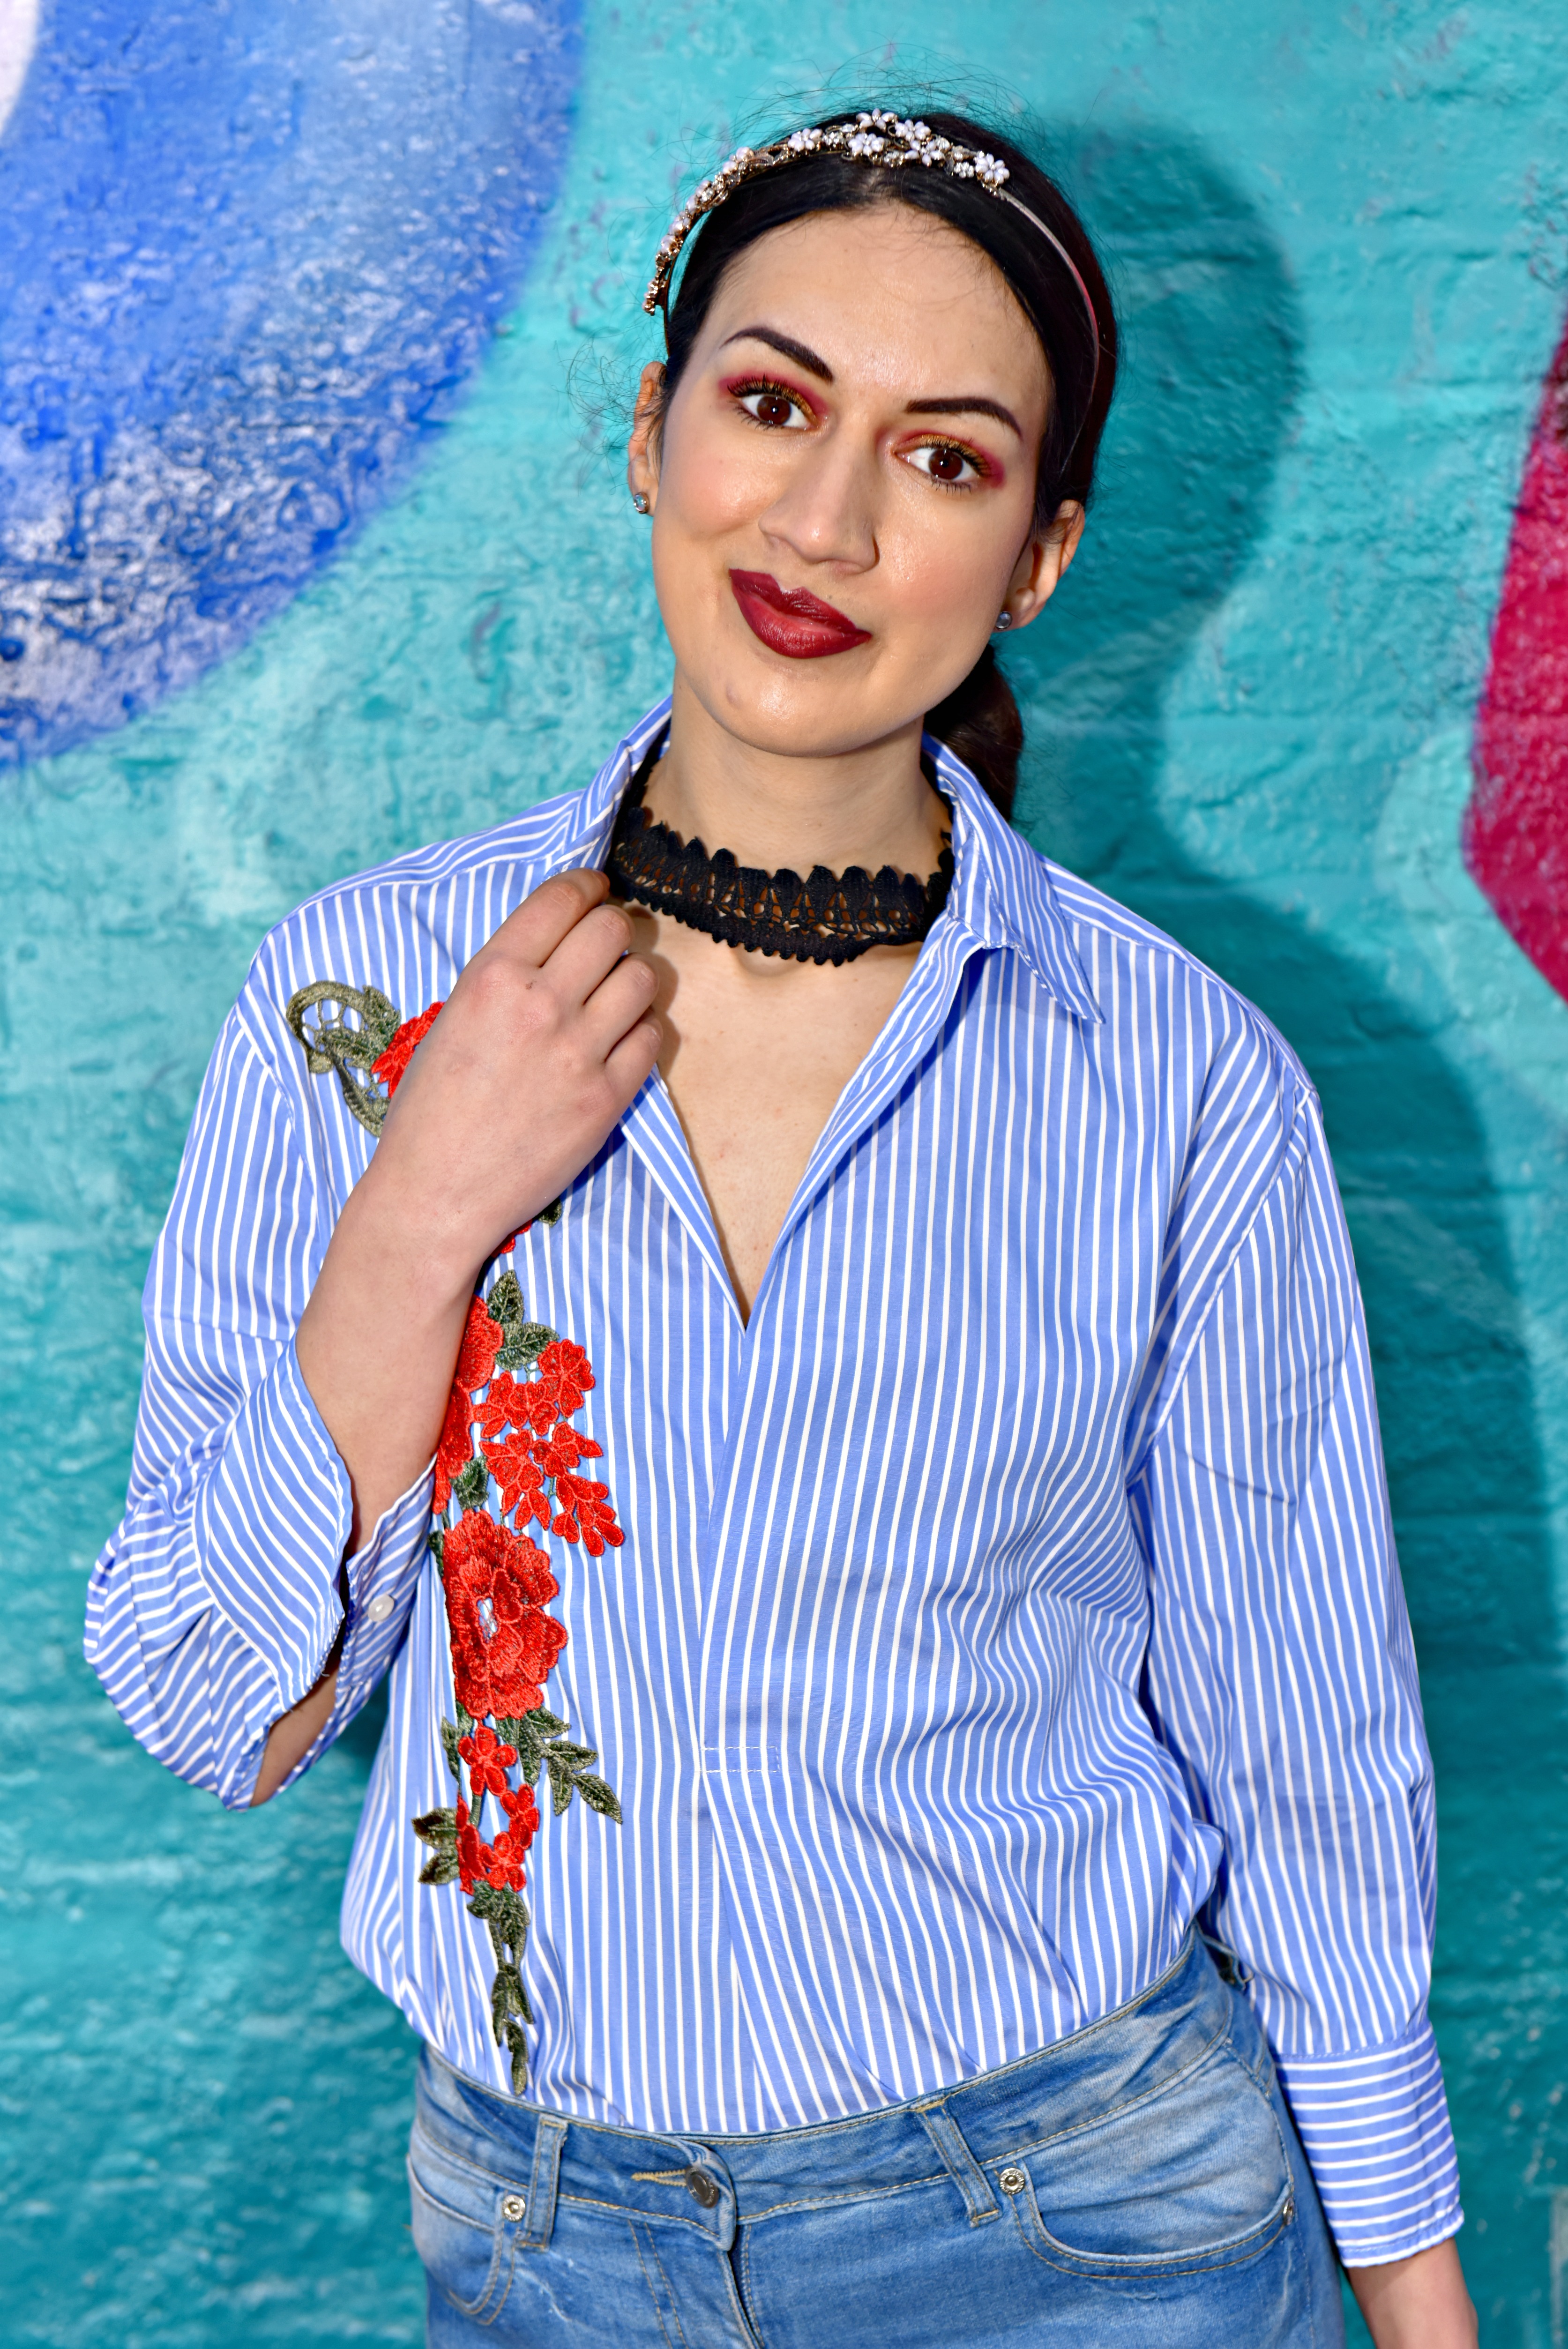 <img src="ana.jpg" alt="ana floral embroidered shirt to wear to work"> 